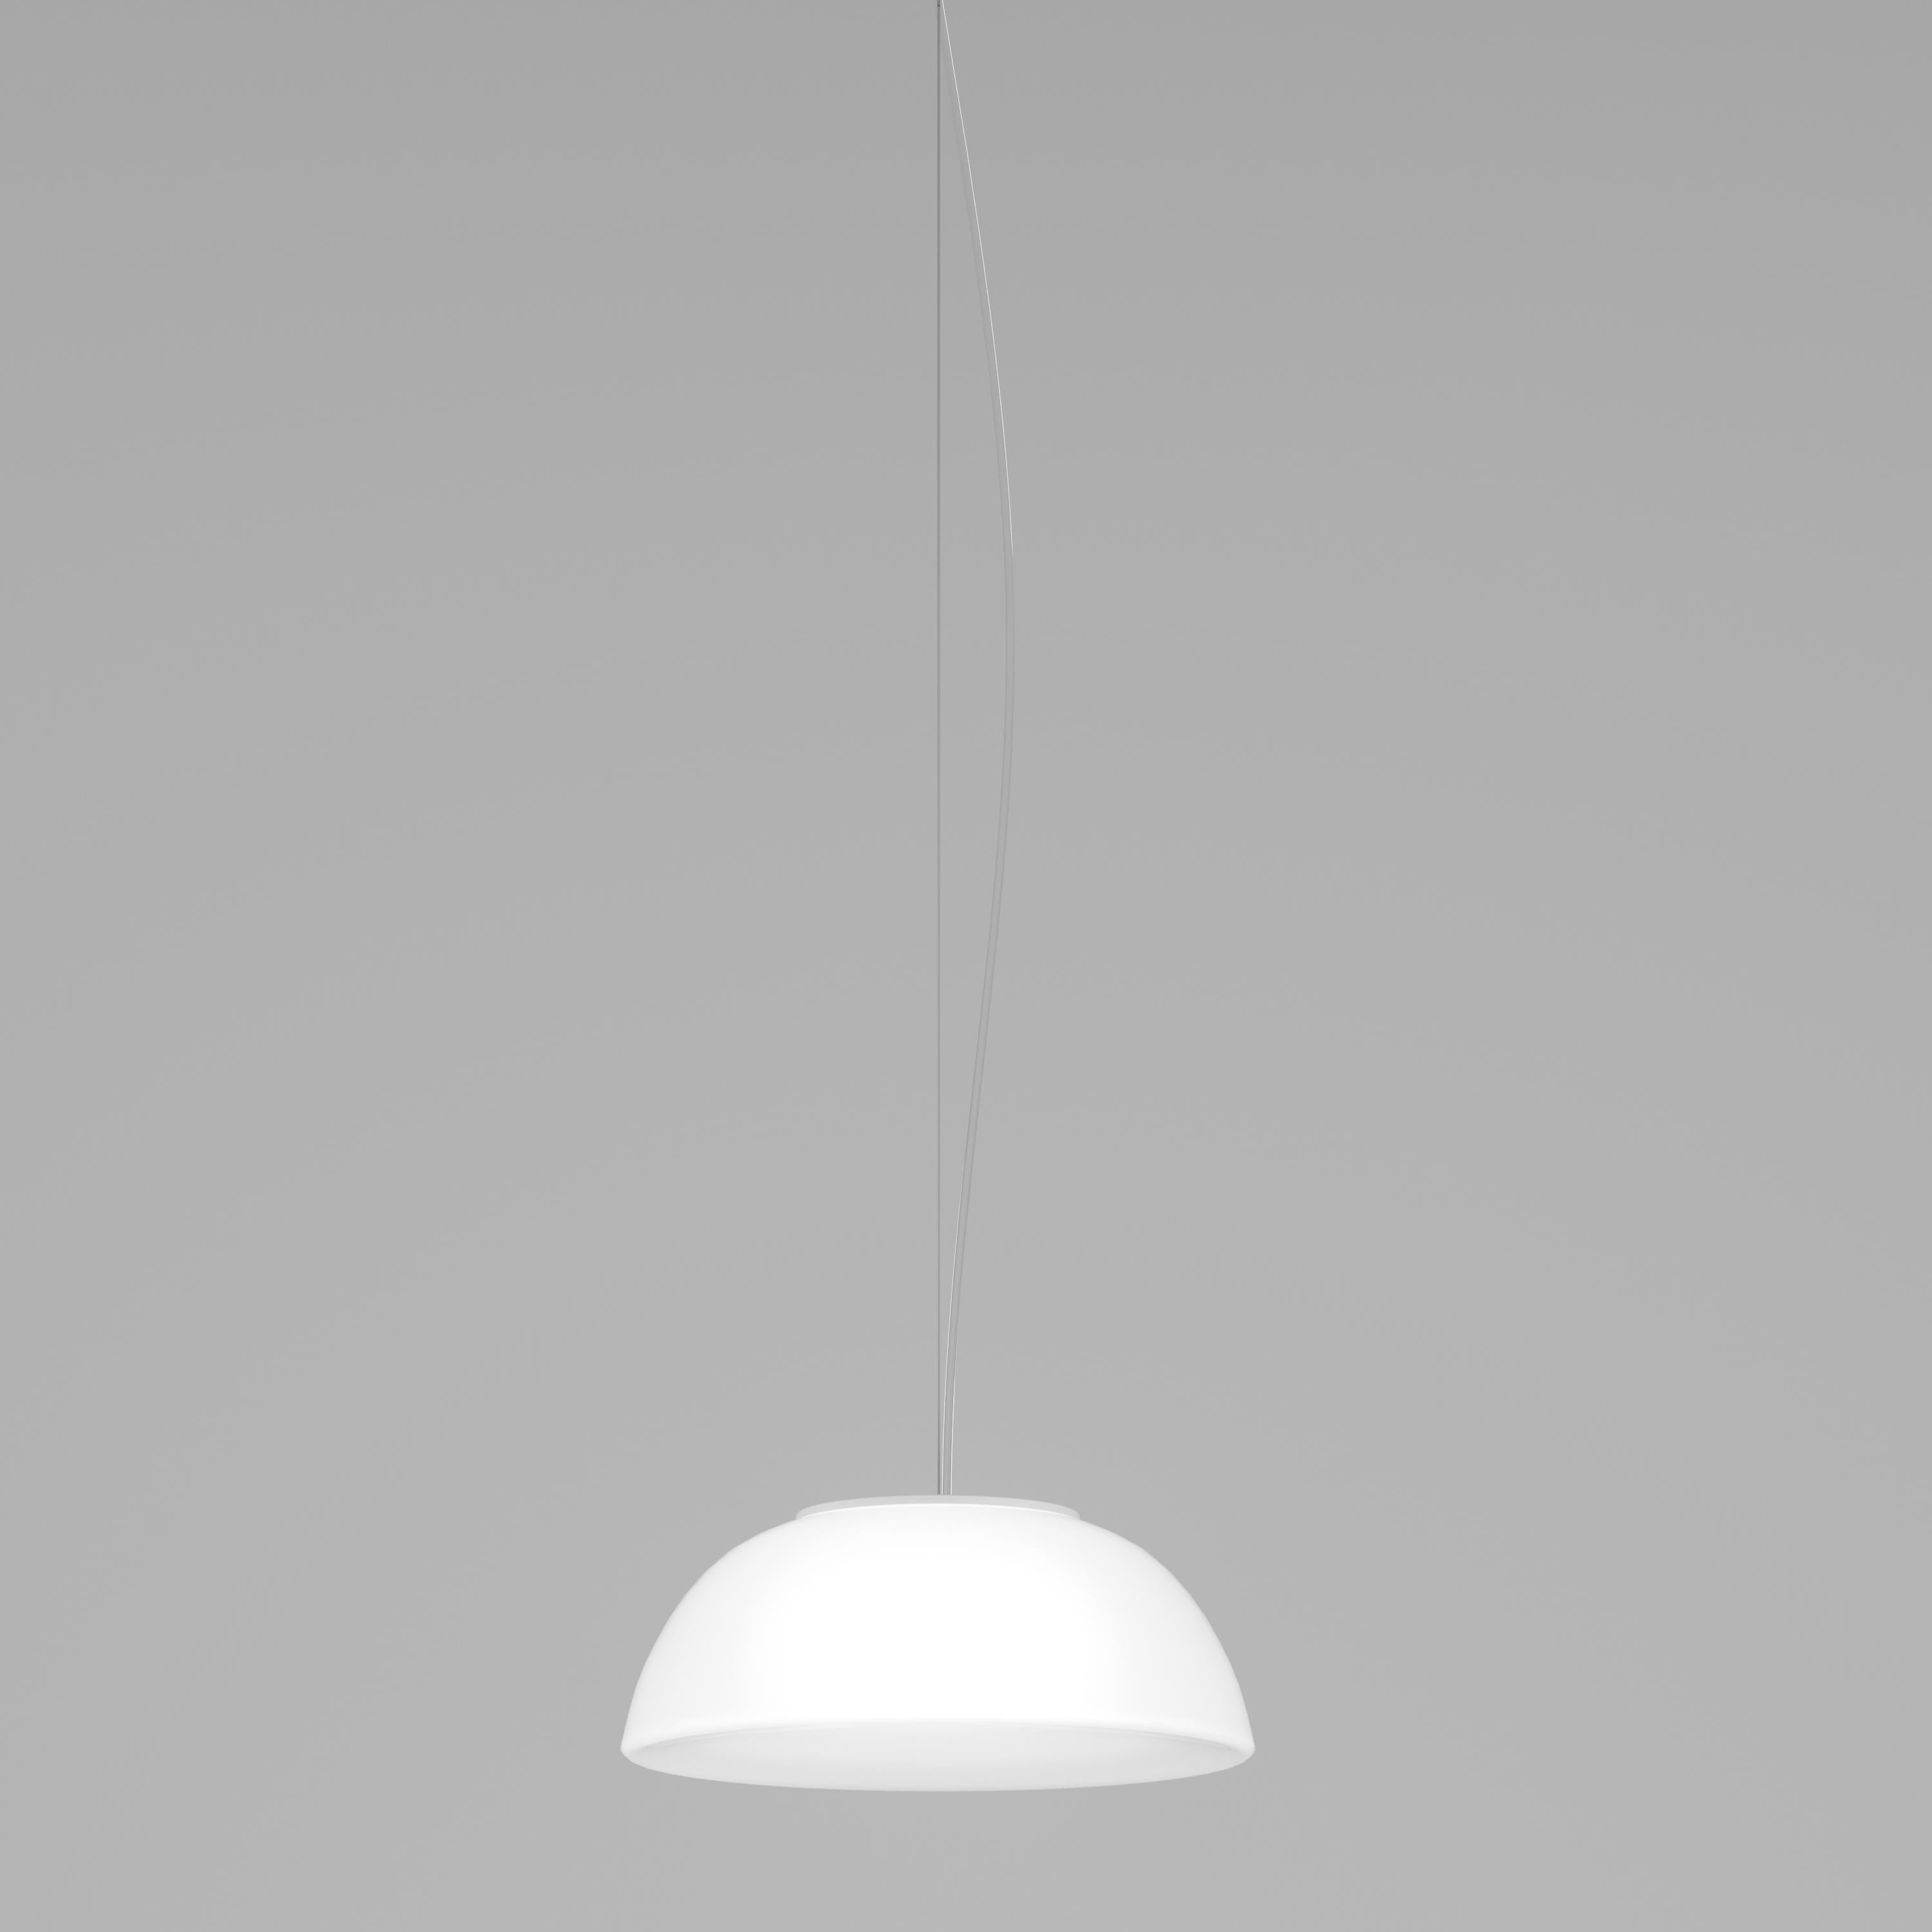 Available as pendant, ceiling or wall lamp. It is the perfect answer for those looking for a large lamp. The diffuser, especially in the bigger size, offers a large lighting surface area despite a minimalist metal frame.

Specifications:
Material: